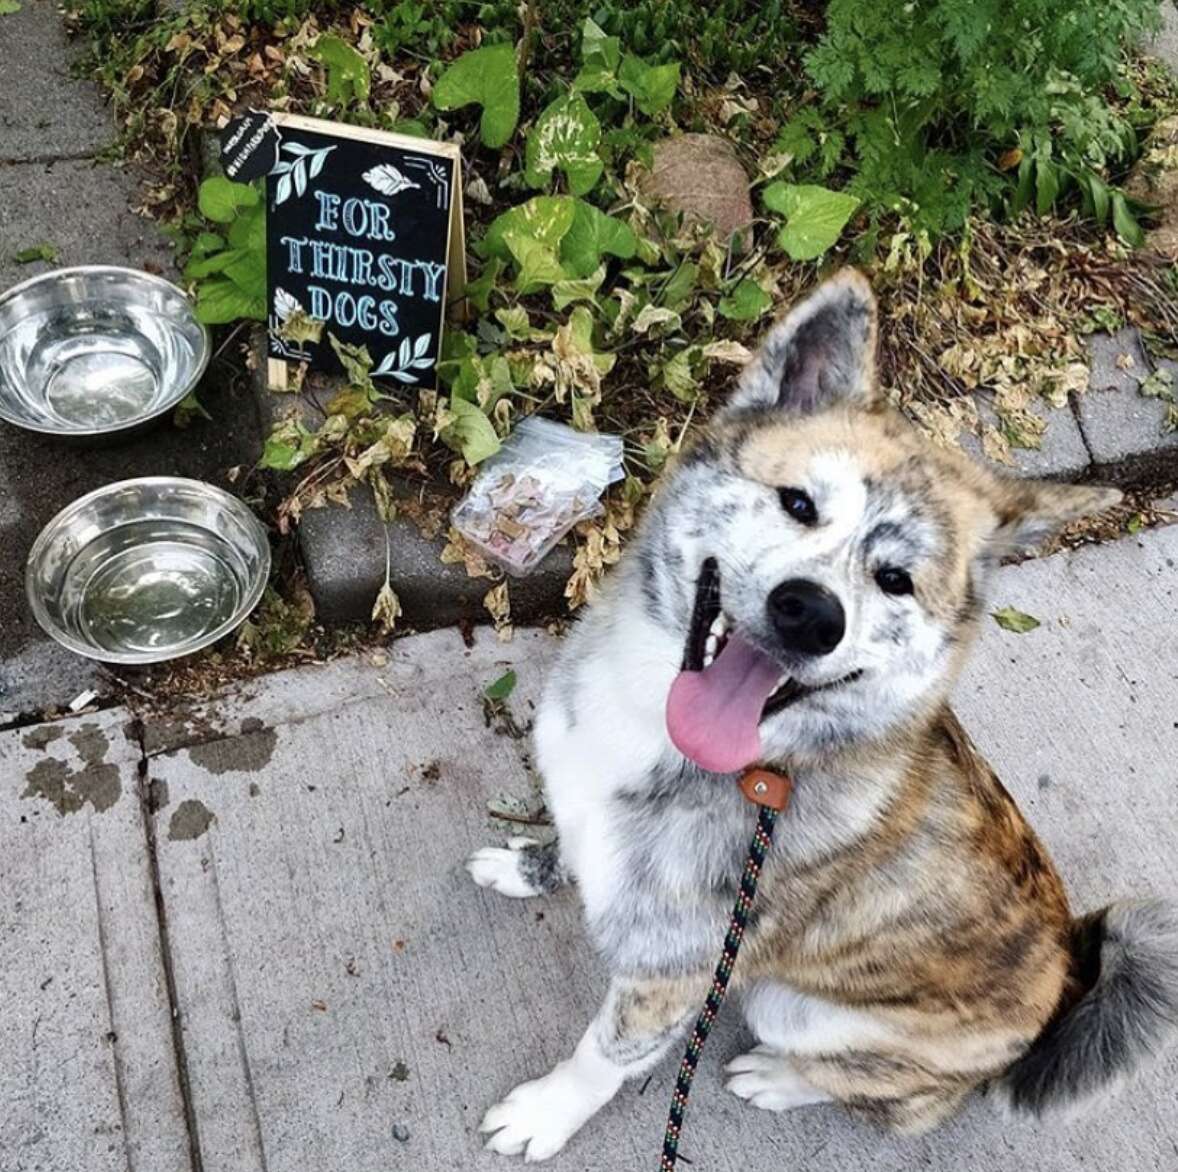 Woman sets up a dog cafe in her front yard